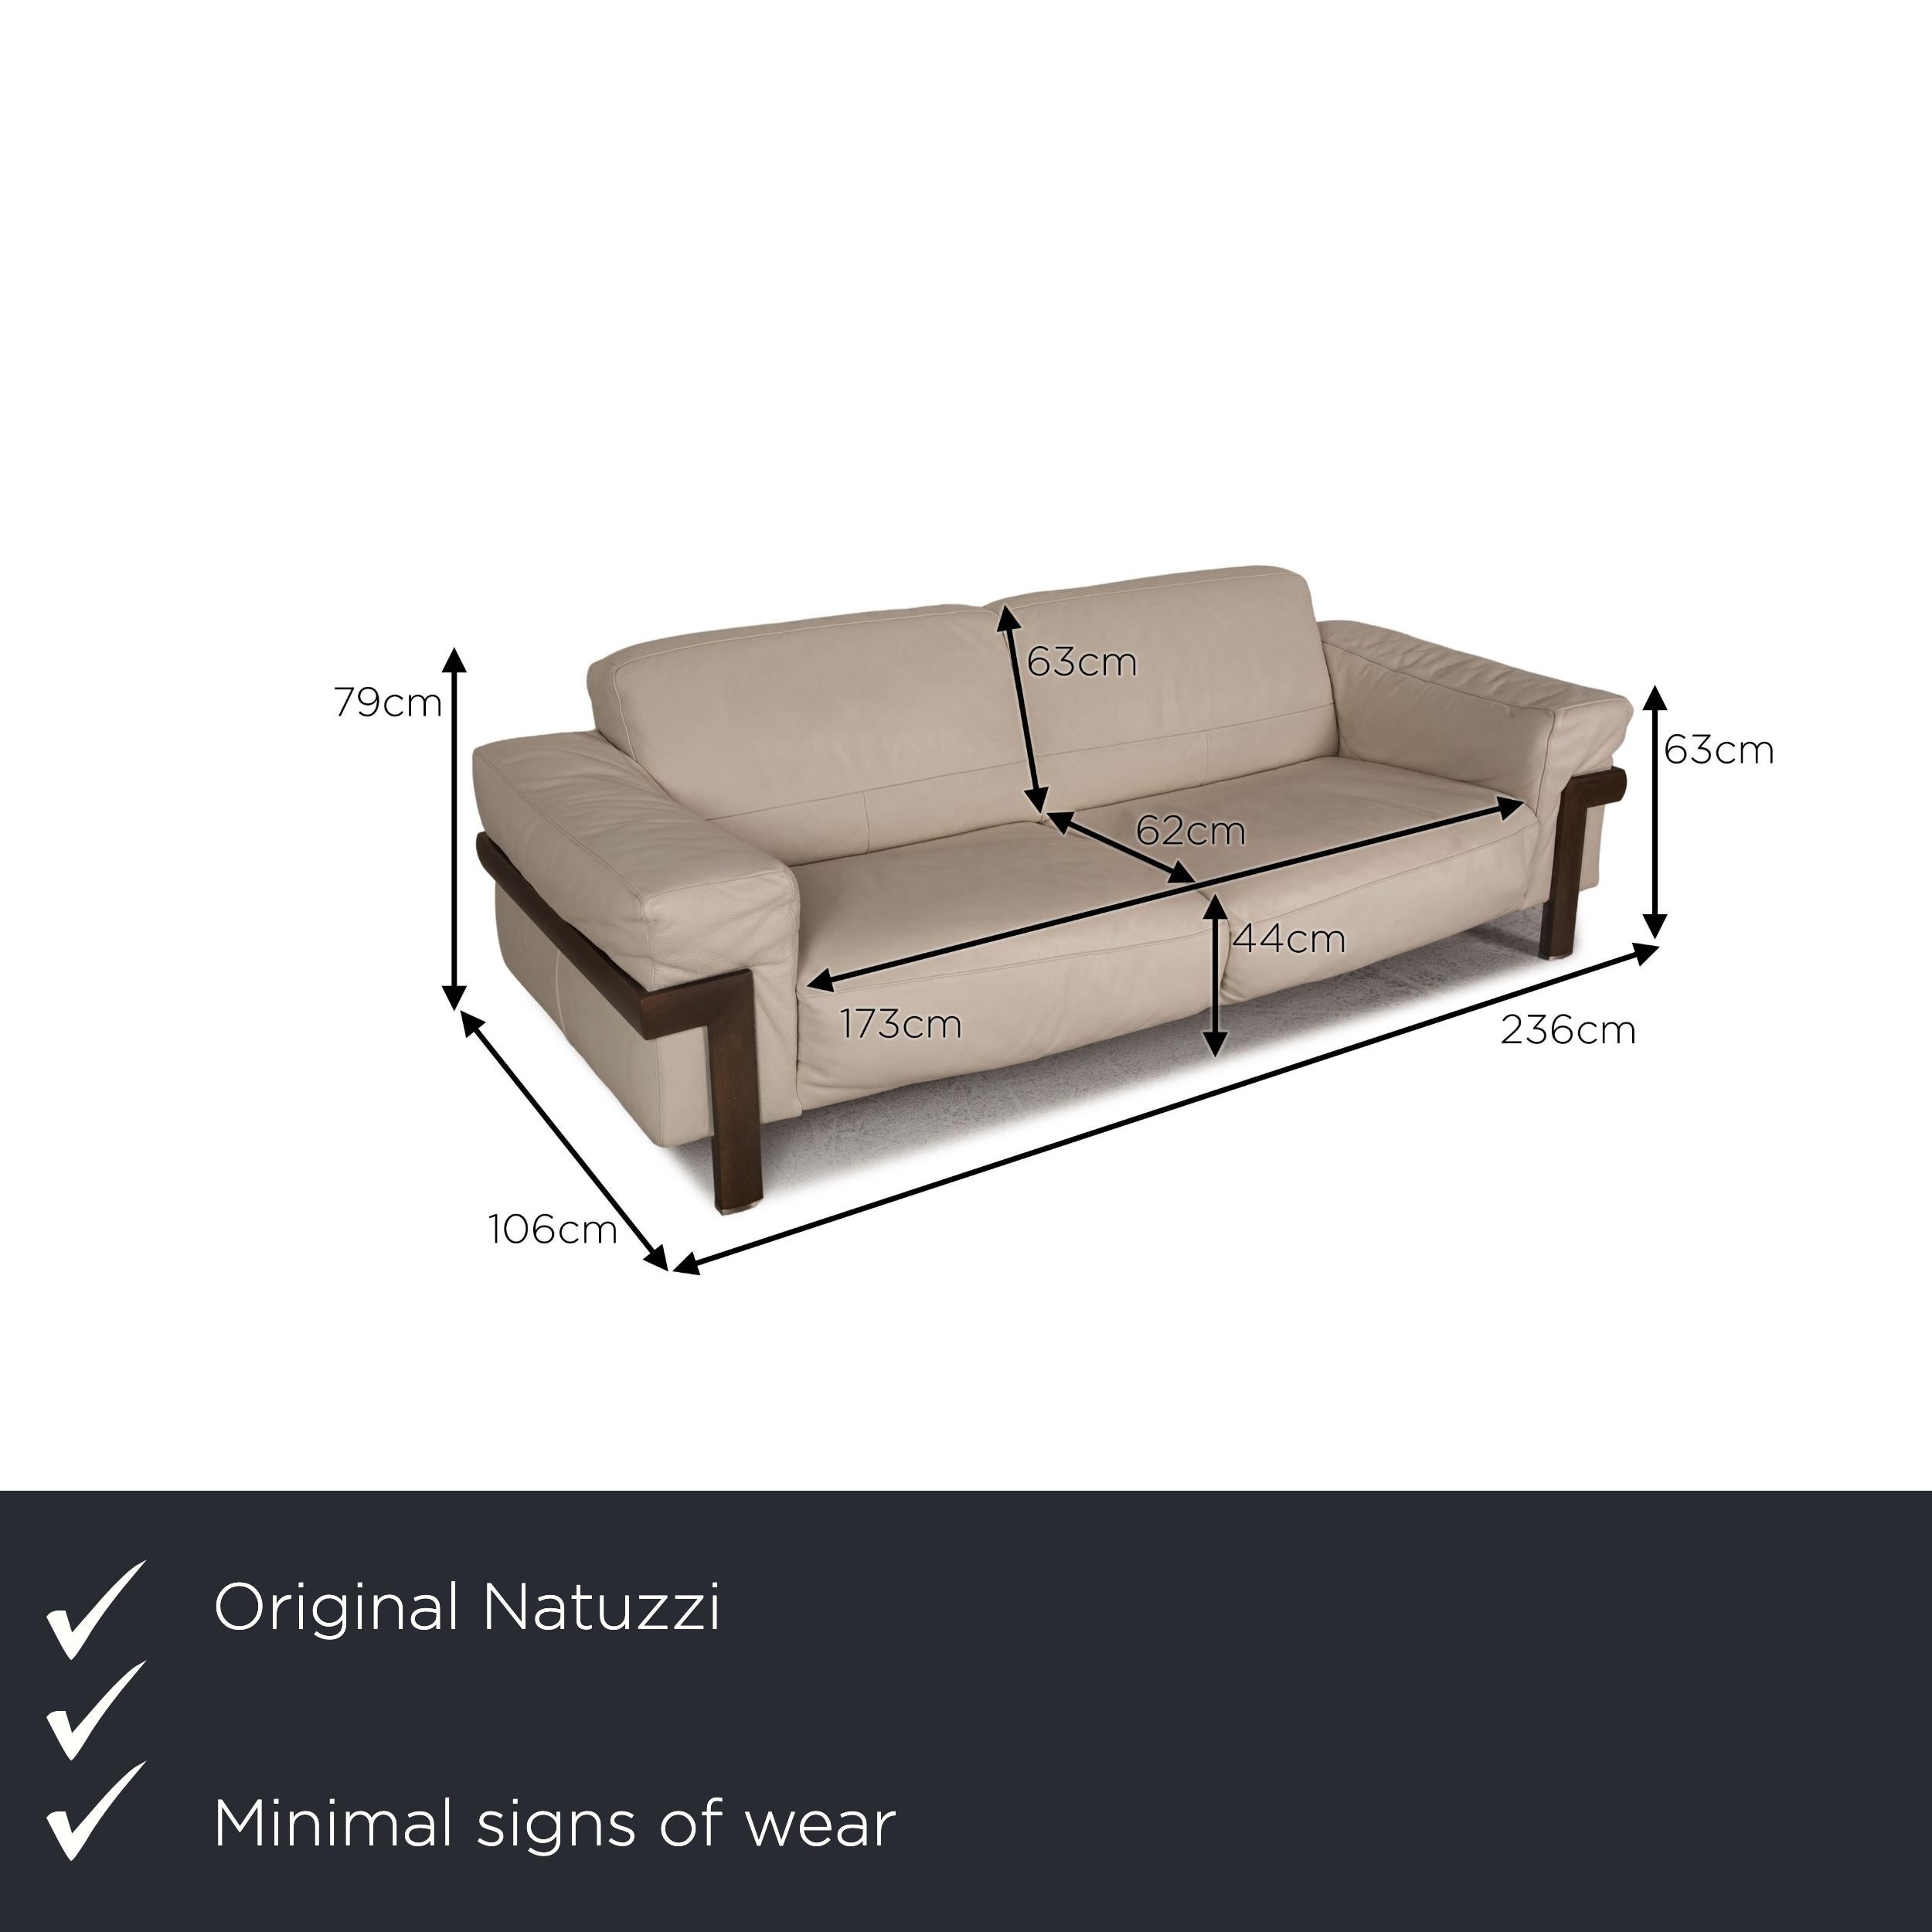 We present to you a Natuzzi leather sofa cream two-seater couch.

Product measurements in centimeters:

Measures: depth: 106
width: 236
height: 79
seat height: 44
rest height: 63
seat depth: 62
seat width: 173
back height: 63.

 